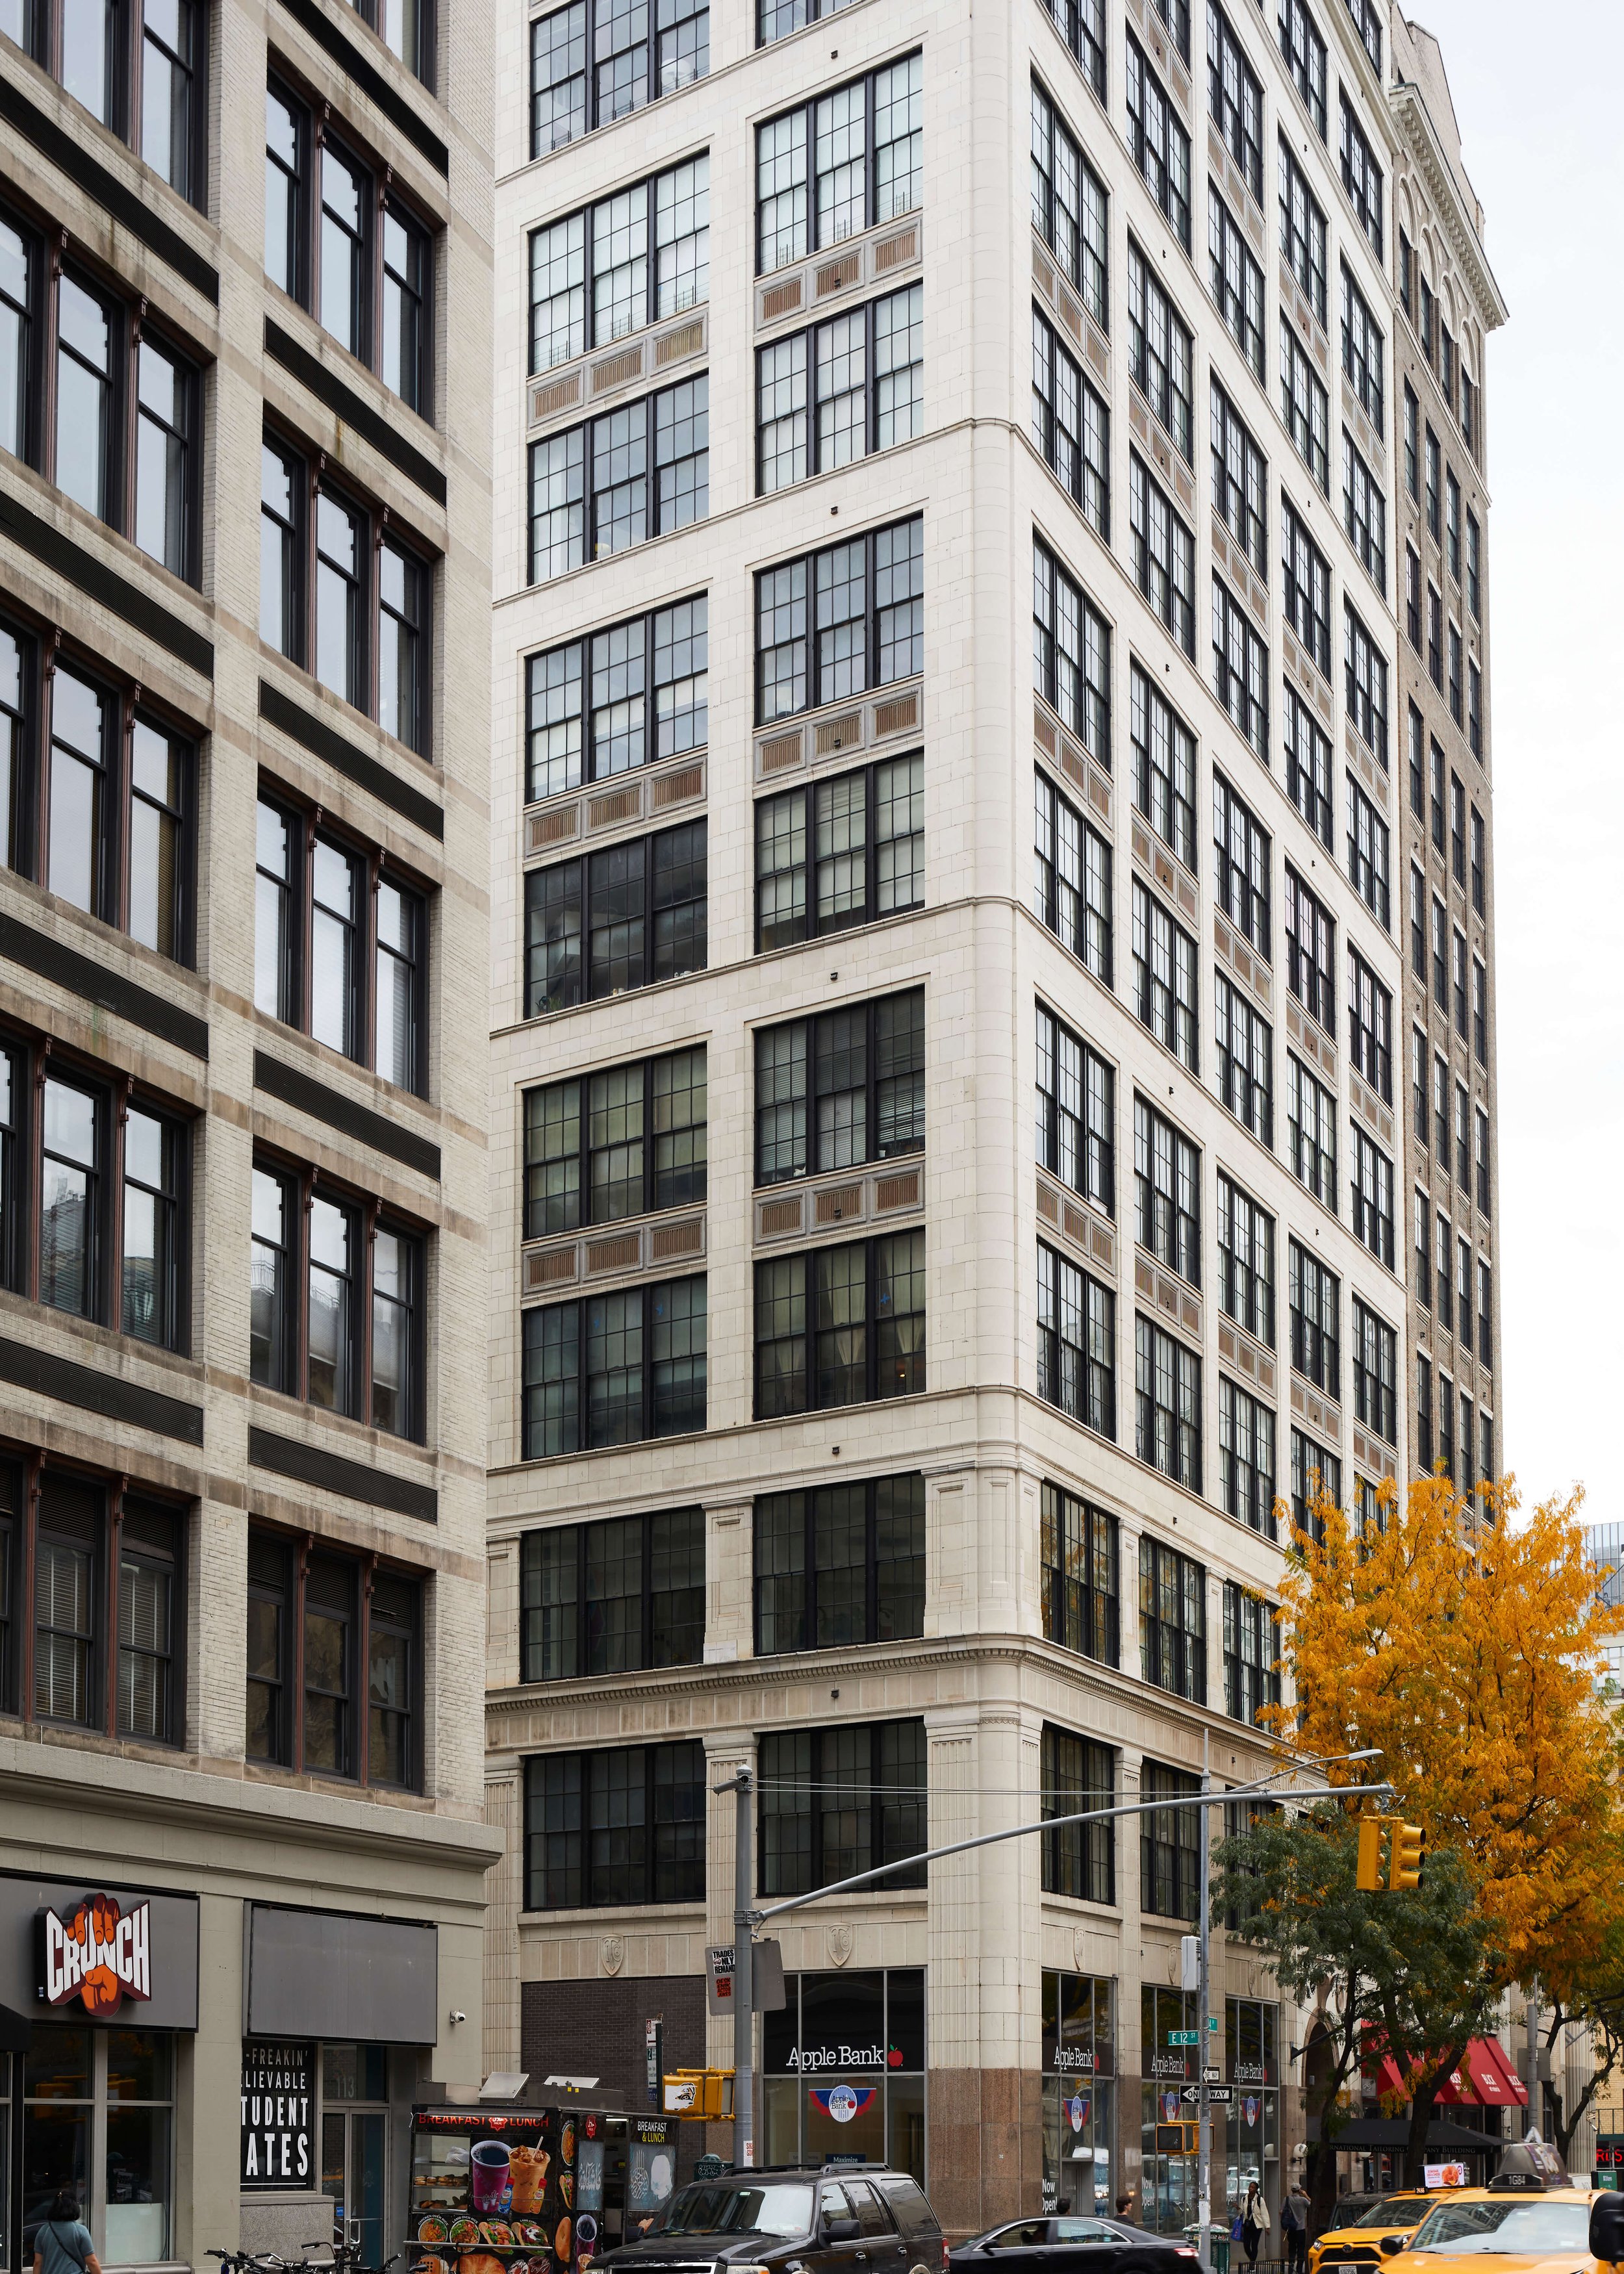  111 Fourth Avenue (center). This almost perfectly intact thirteen-story terra cotta-covered loft building was designed and constructed by Starrett &amp; Van Vleck in 1919 to house the International Tailoring Company. Herman Melville lived in a now-d